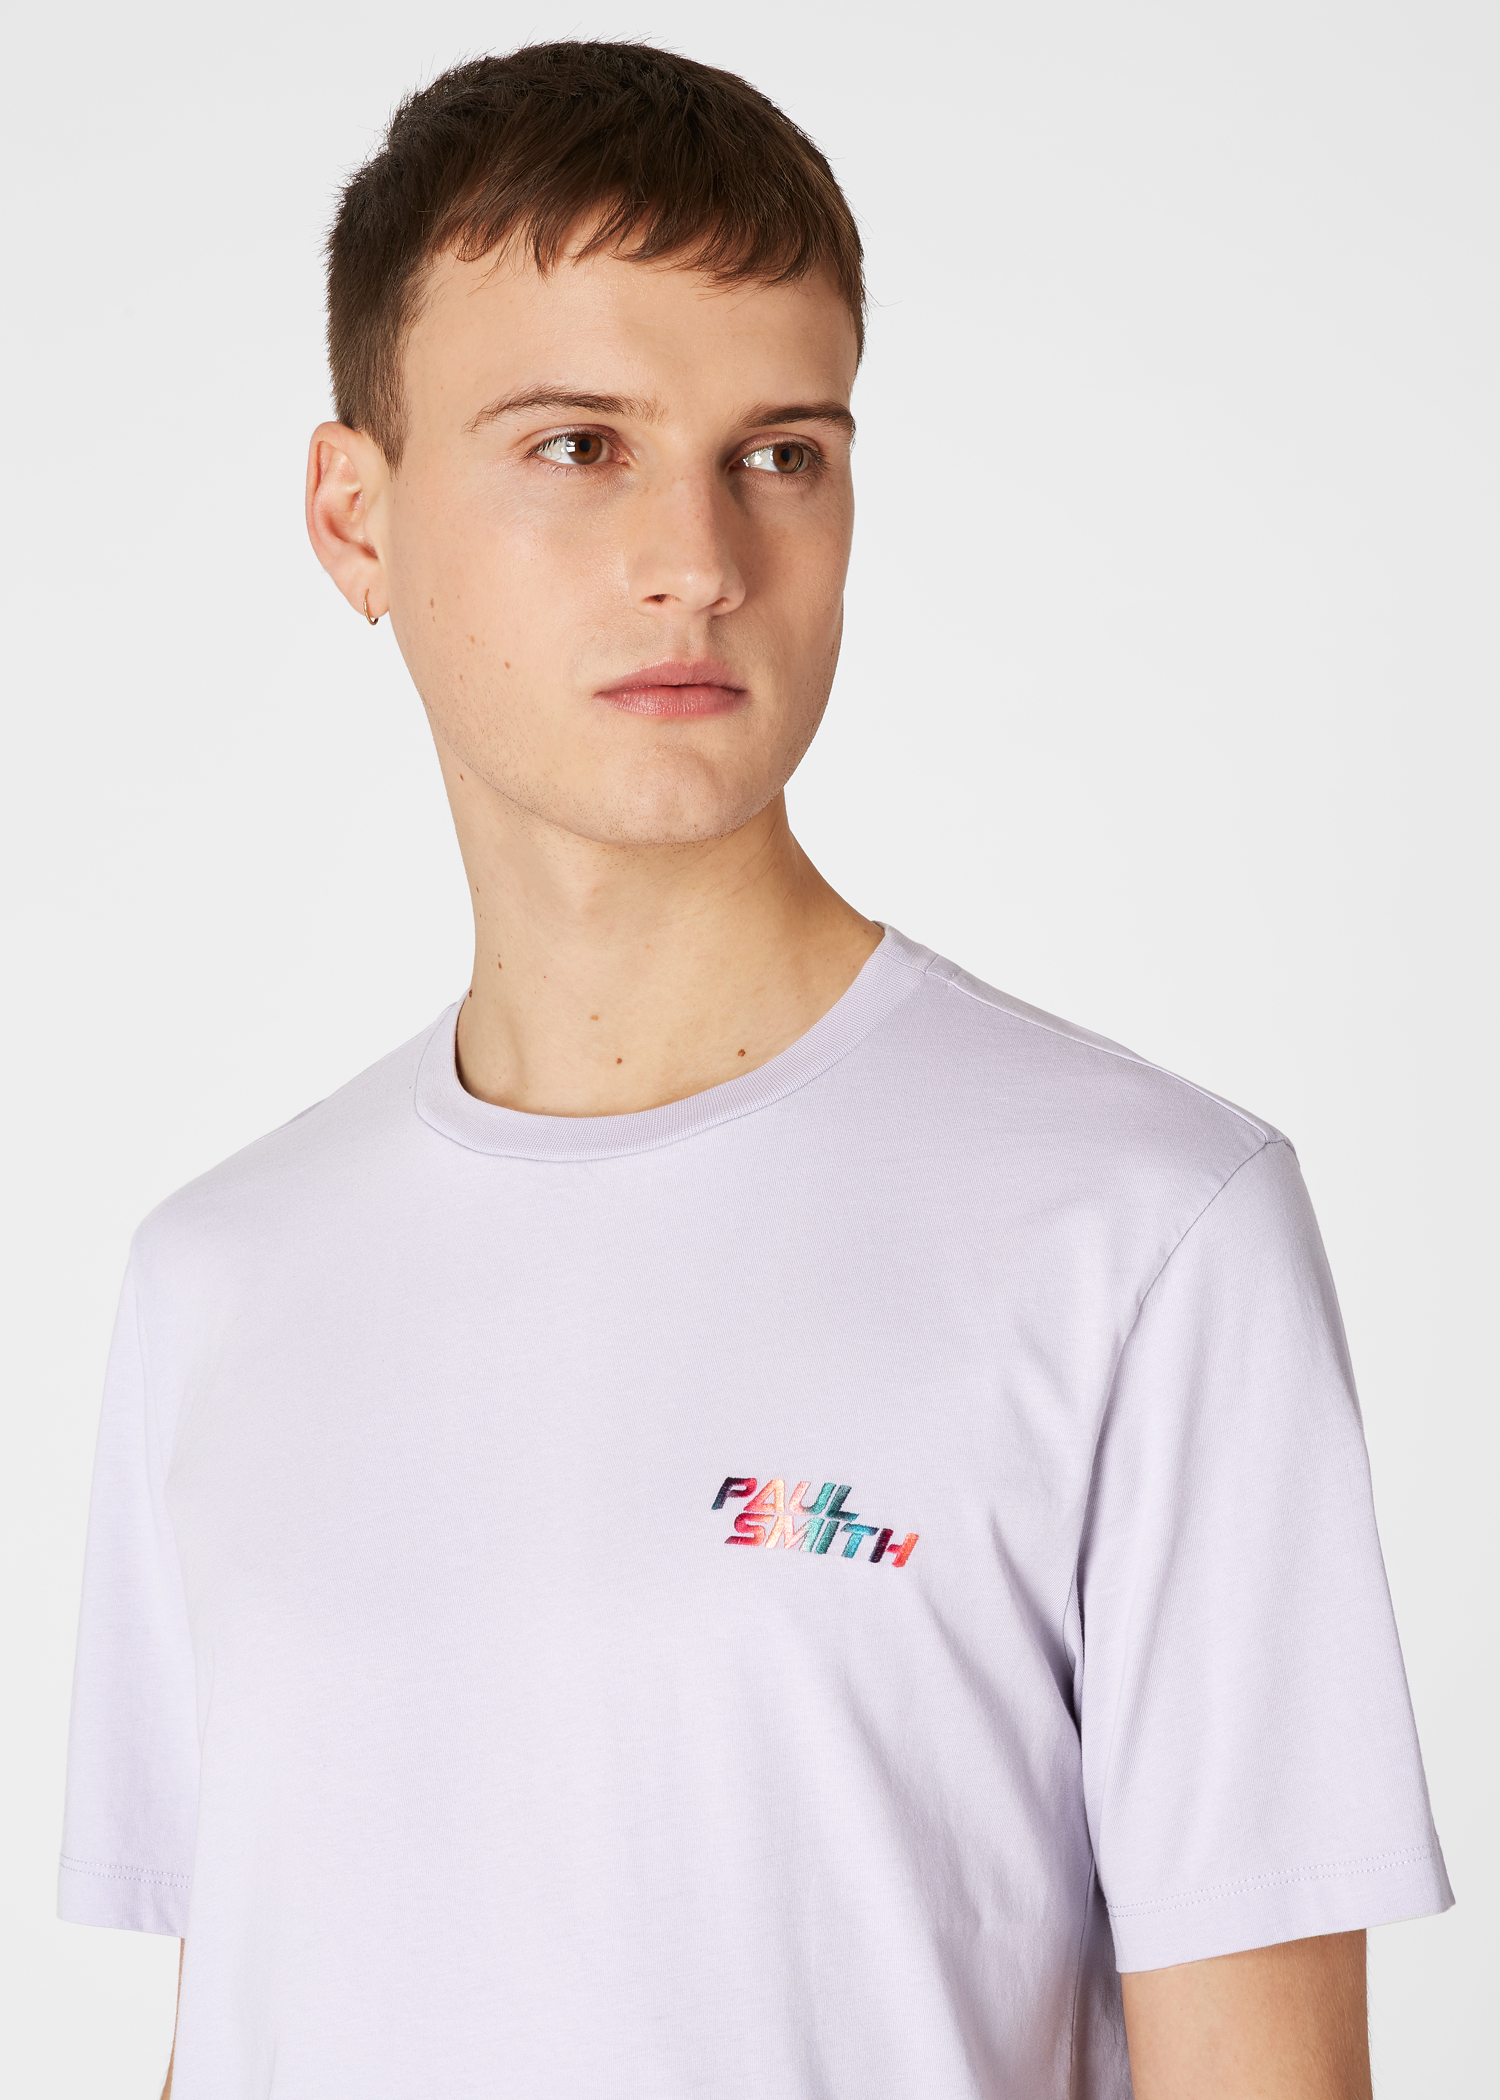 Model front detail crop - Men's Slim-Fit Lilac T-Shirt With 'Paul Smith' Embroidery Paul Smith